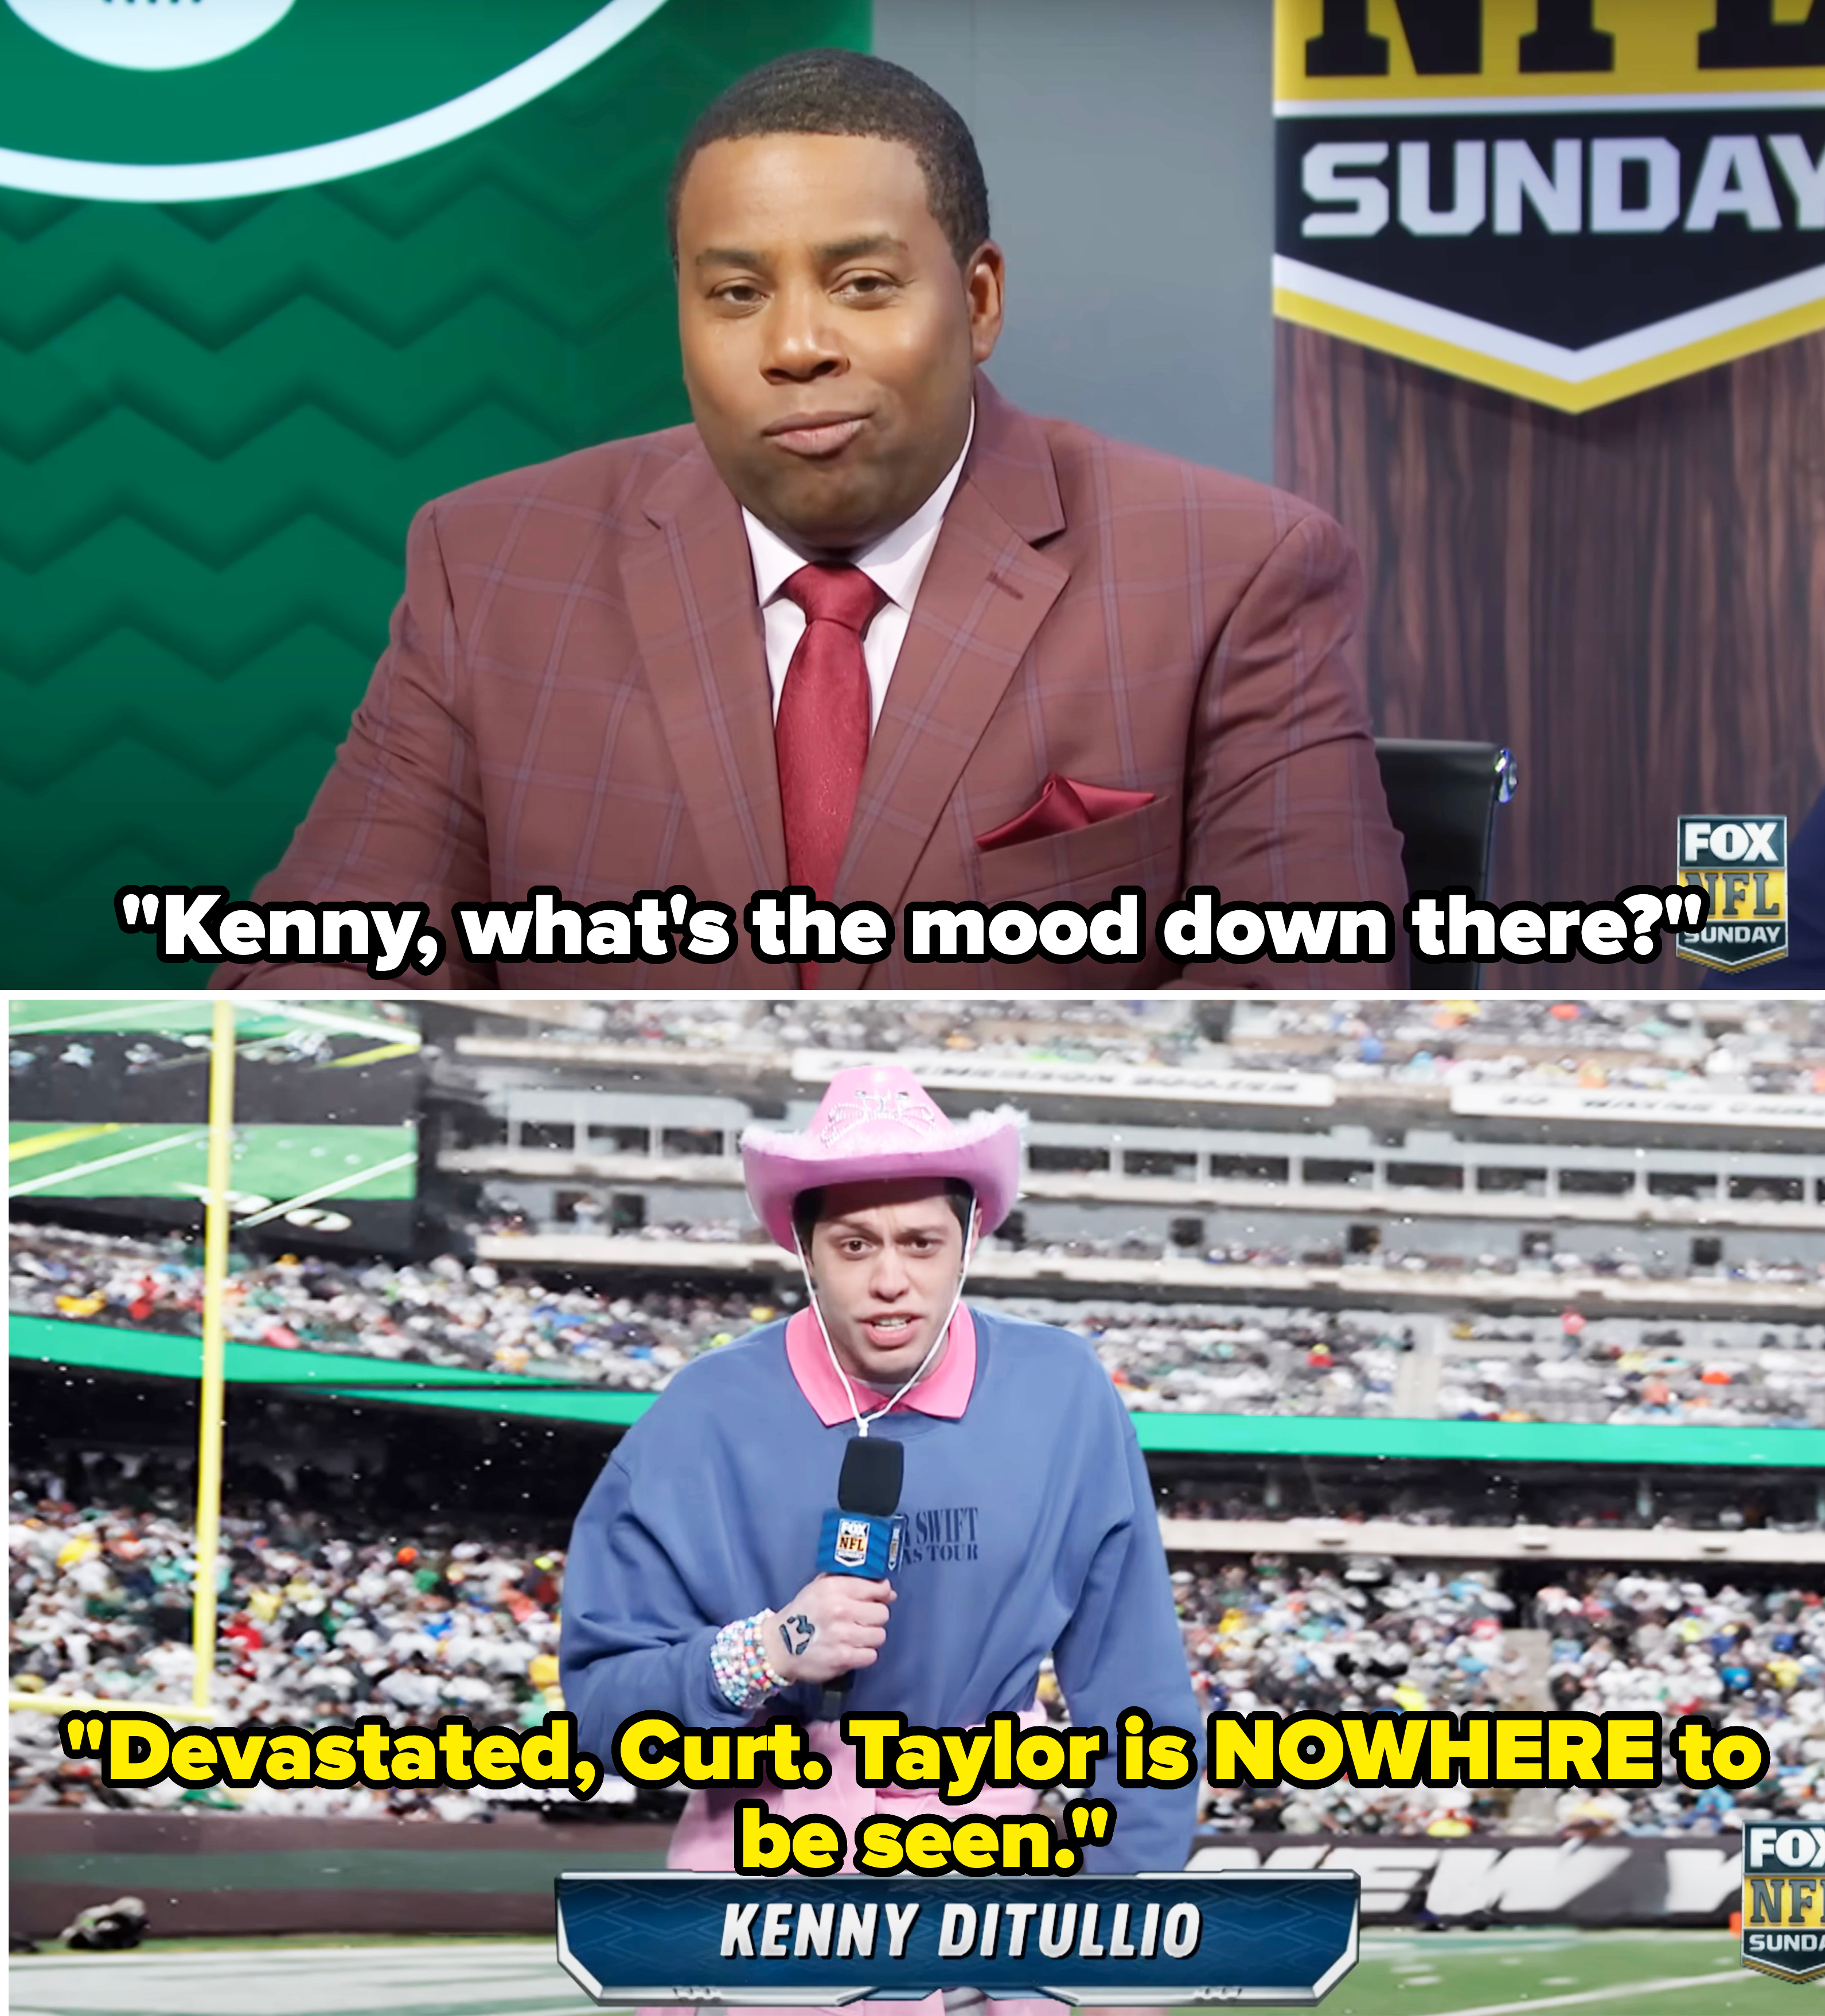 Kenan asking Pete what the mood is like at the podium, and Pete saying &quot;Devastated, Curt; Taylor is NOWHERE to be seen&quot;